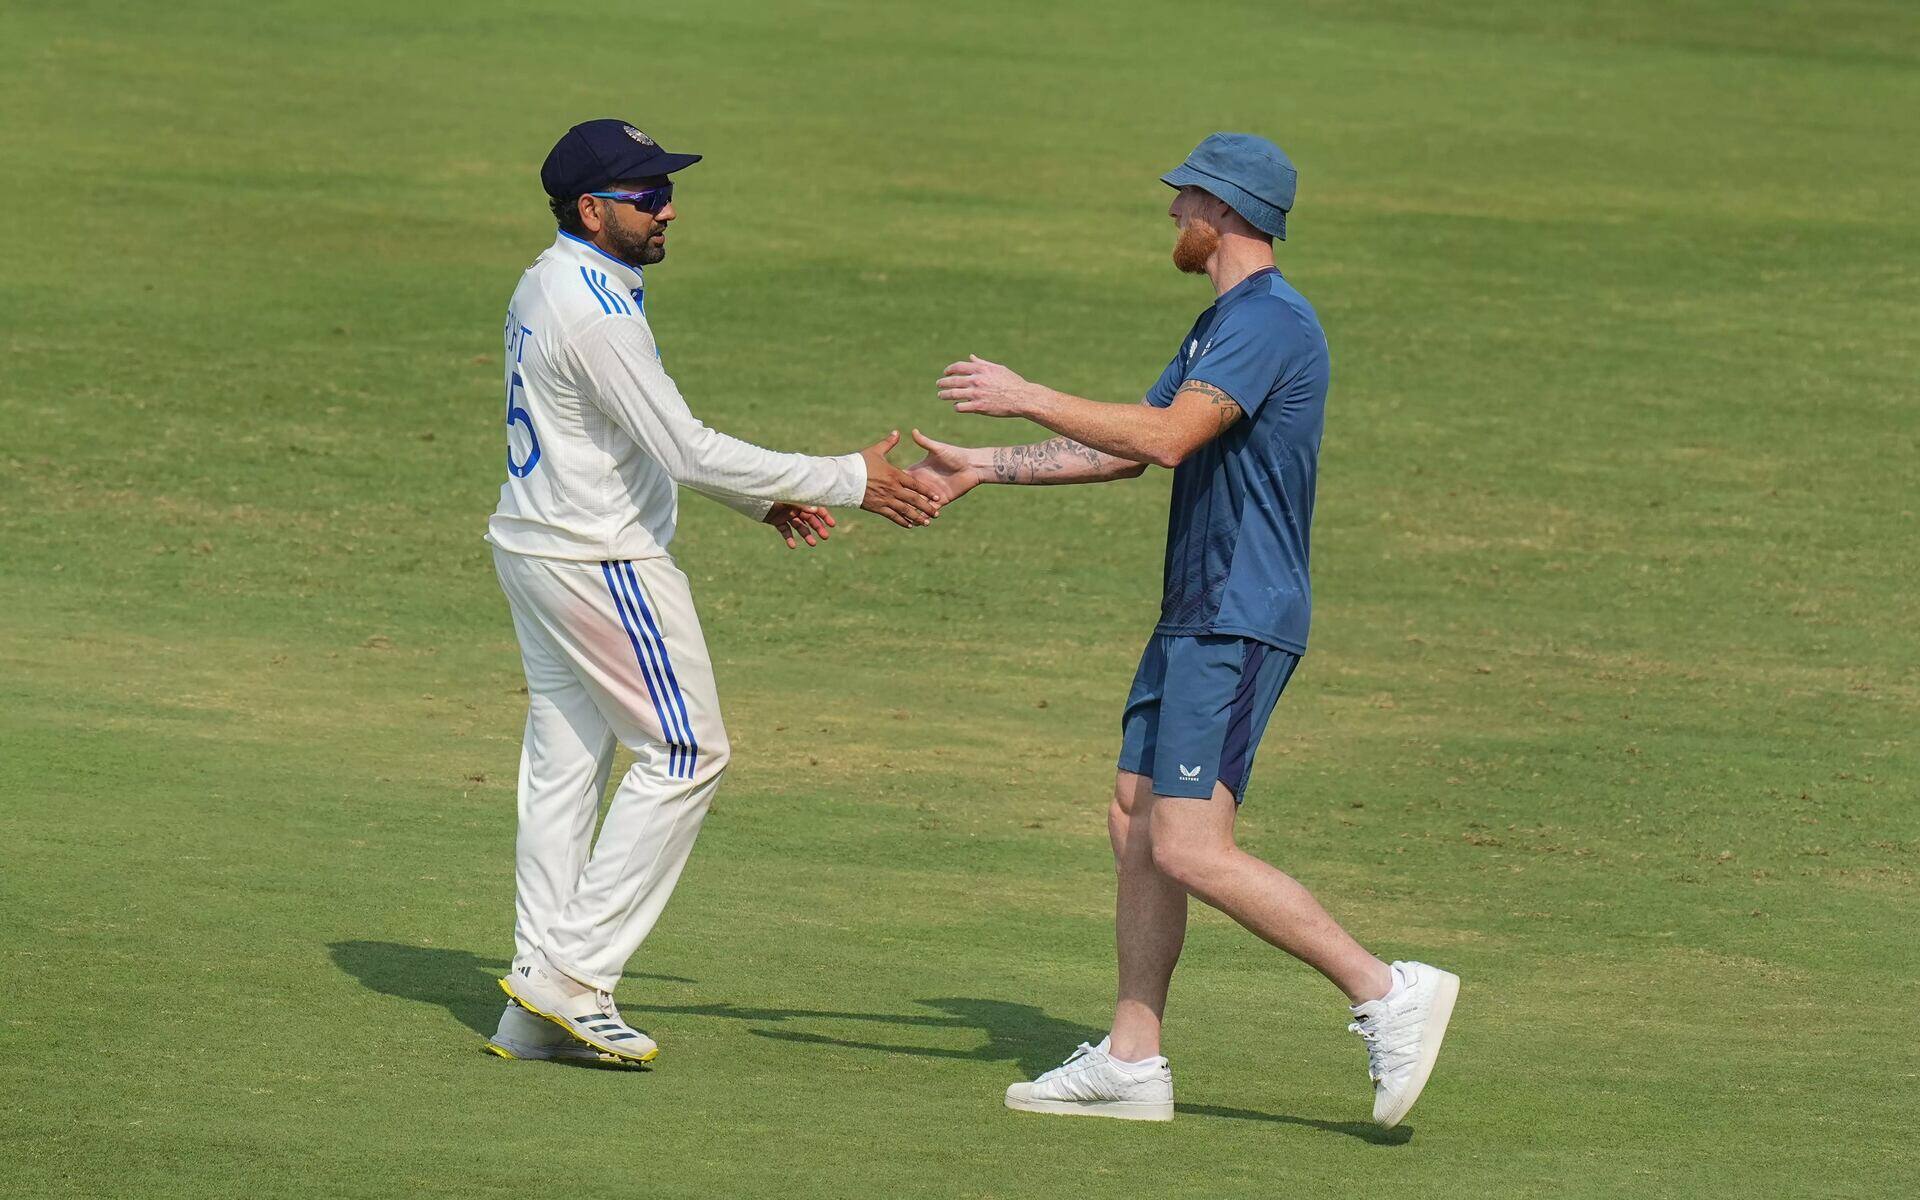 Rohit Sharma will be out to face Ben Stokes' England in Fifth Test (Source: X.com)